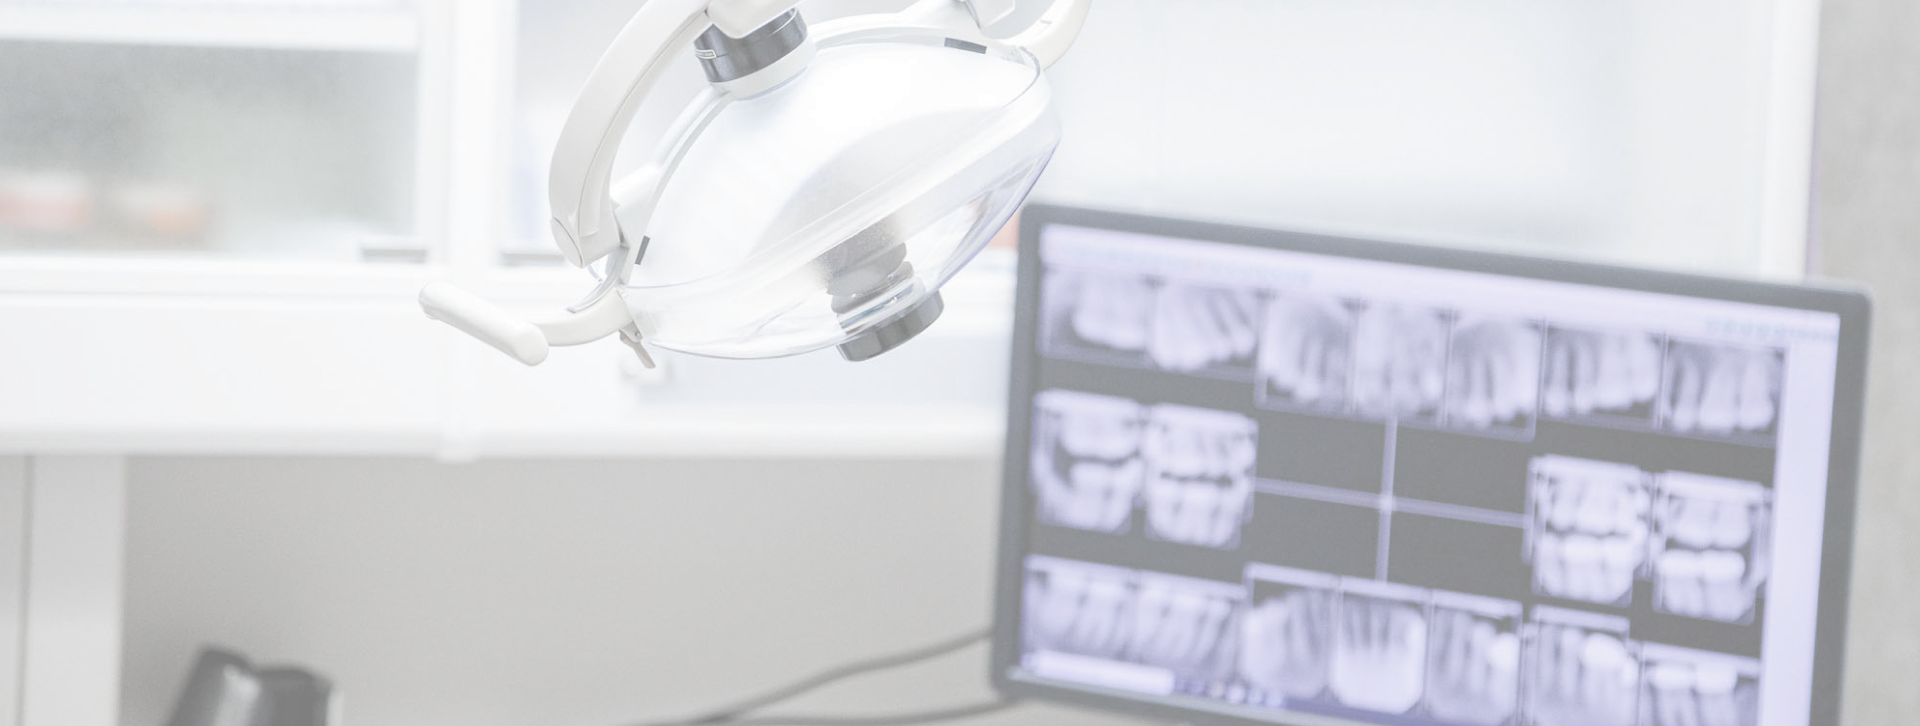 computer monitor with dental x-ray image